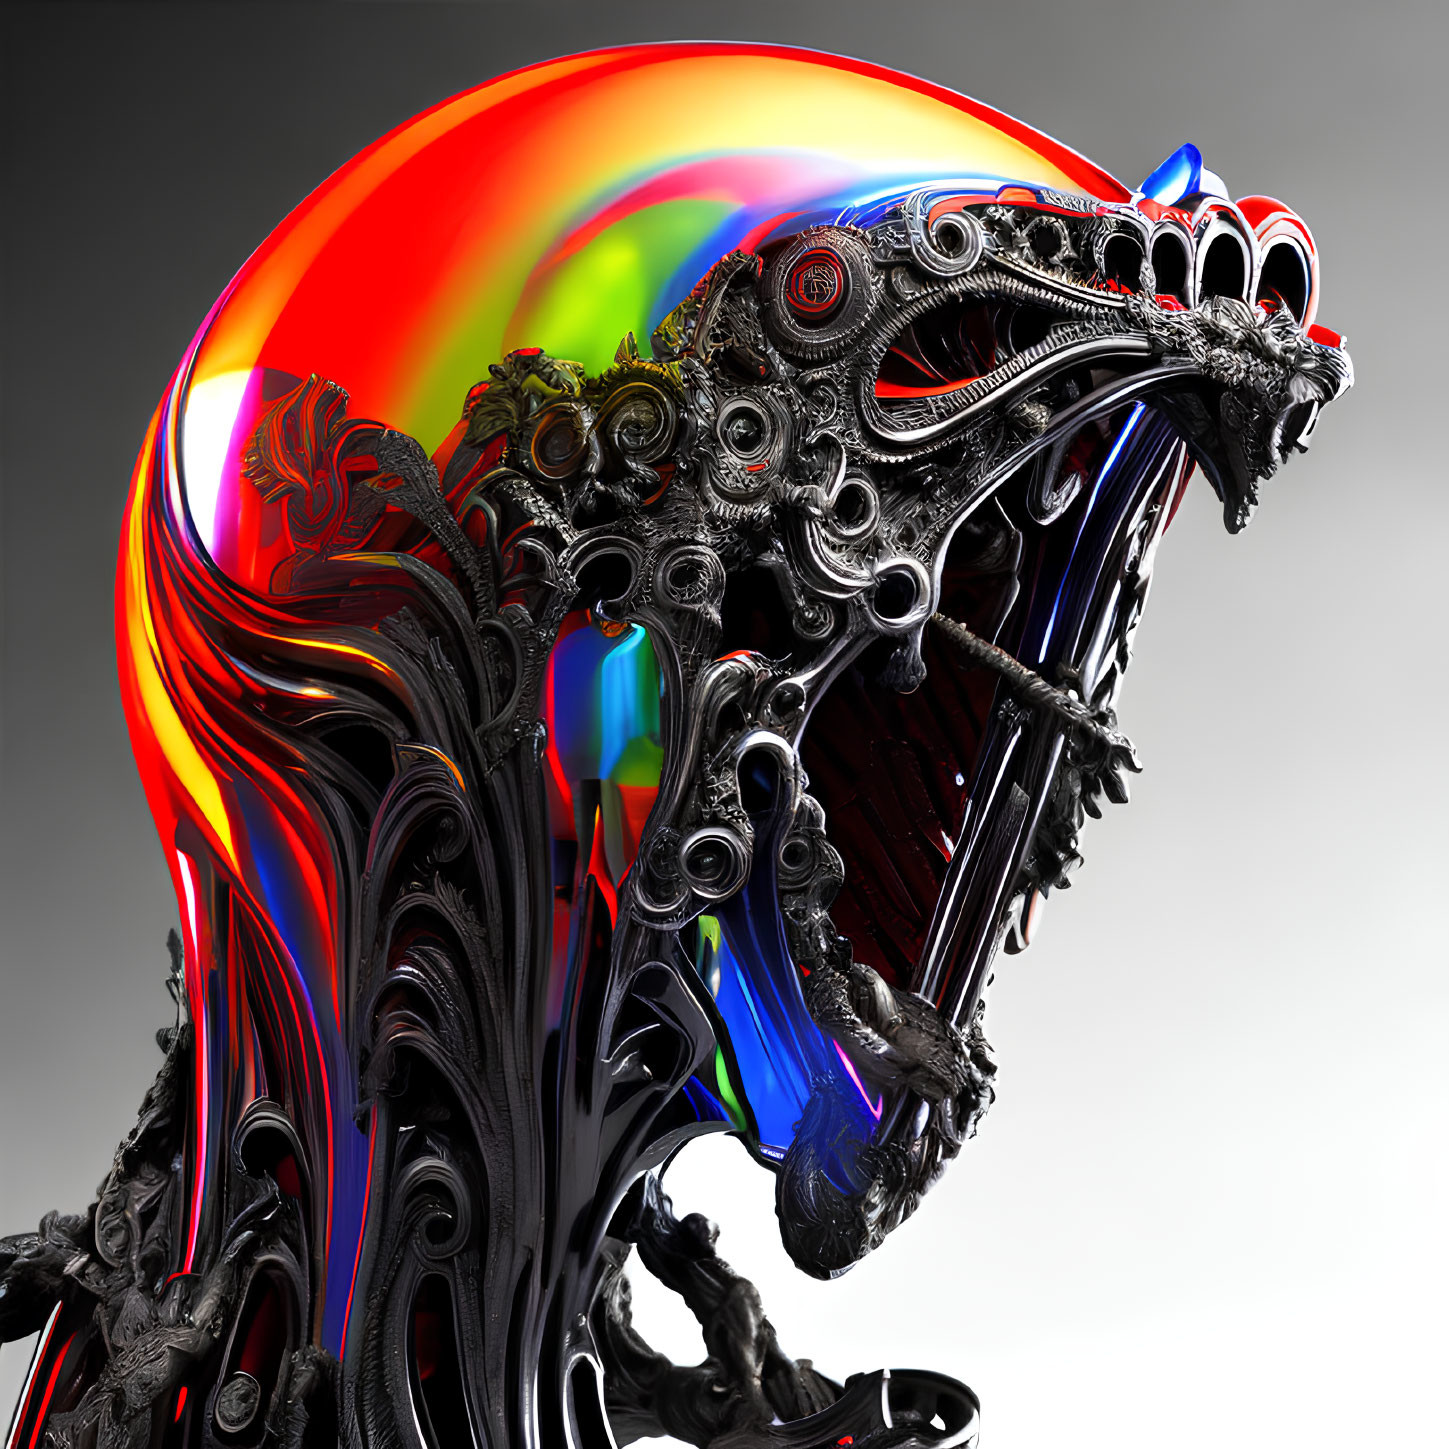 Colorful 3D illustration: biomechanical creature with rainbow mane and metallic structures